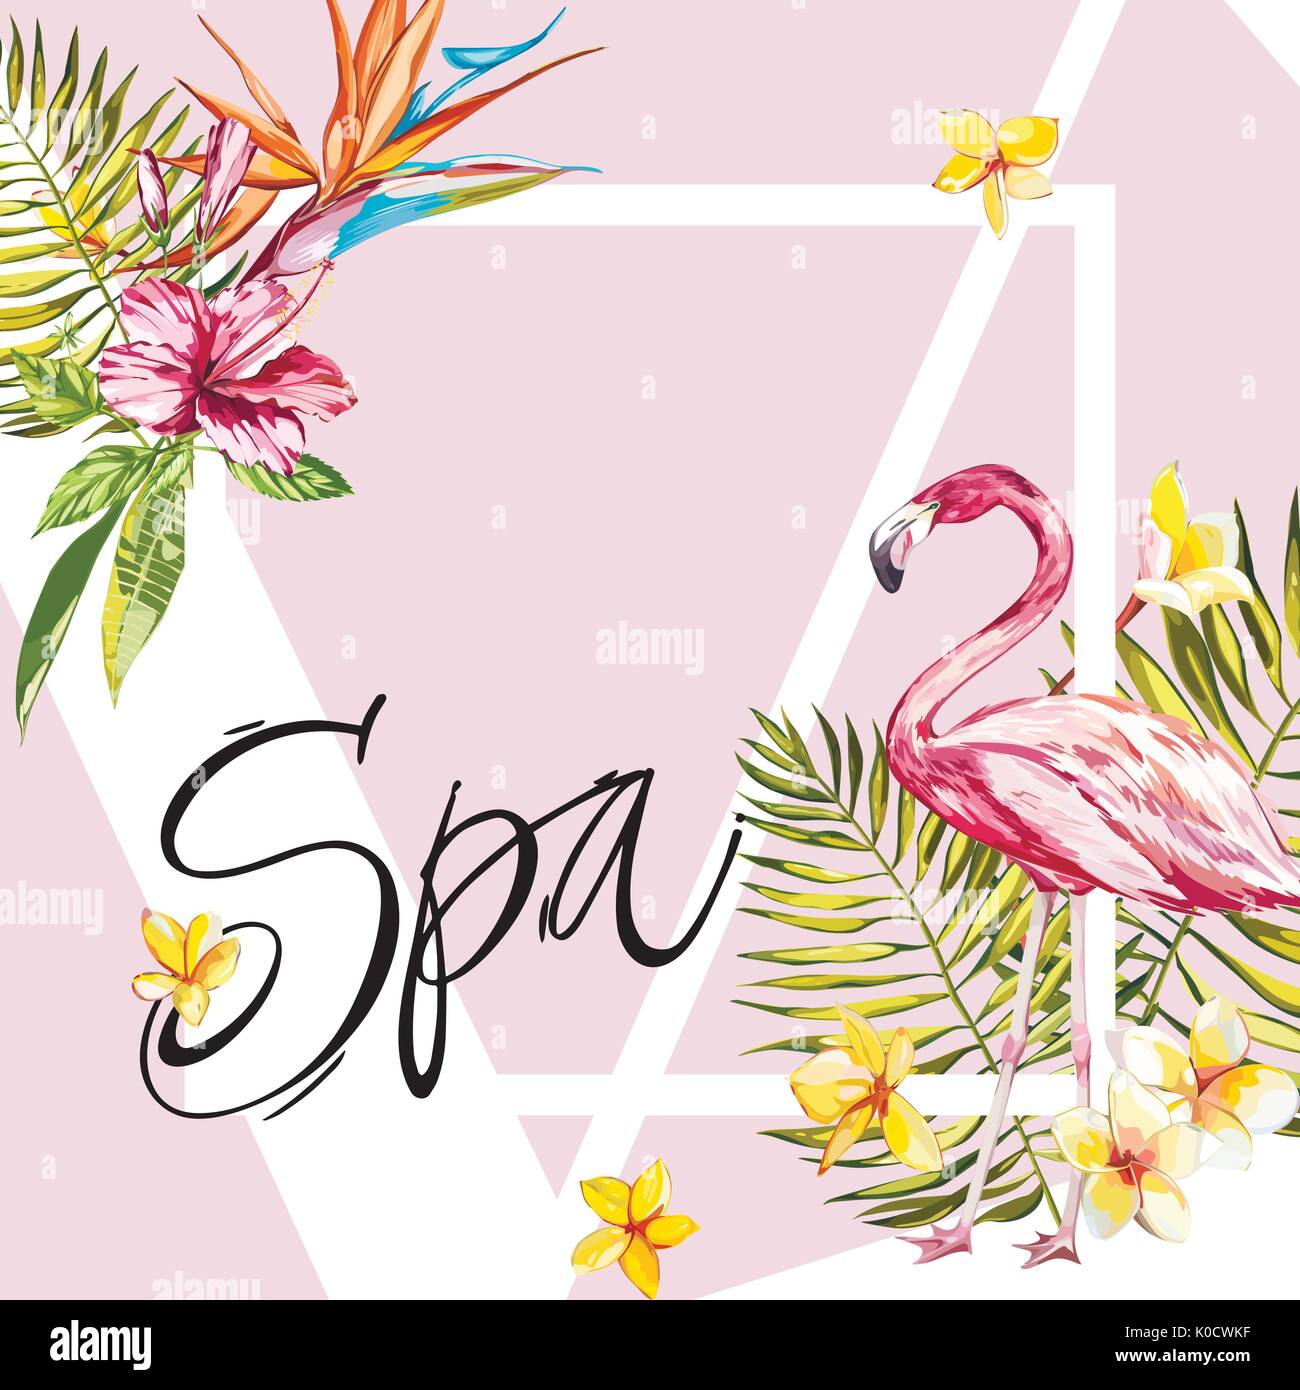 Banner, poster with flamingo, palm leaves, jungle leaf. Beautiful vector floral tropical summer background. Lettering composition - Spa. EPS 10 Stock Vector